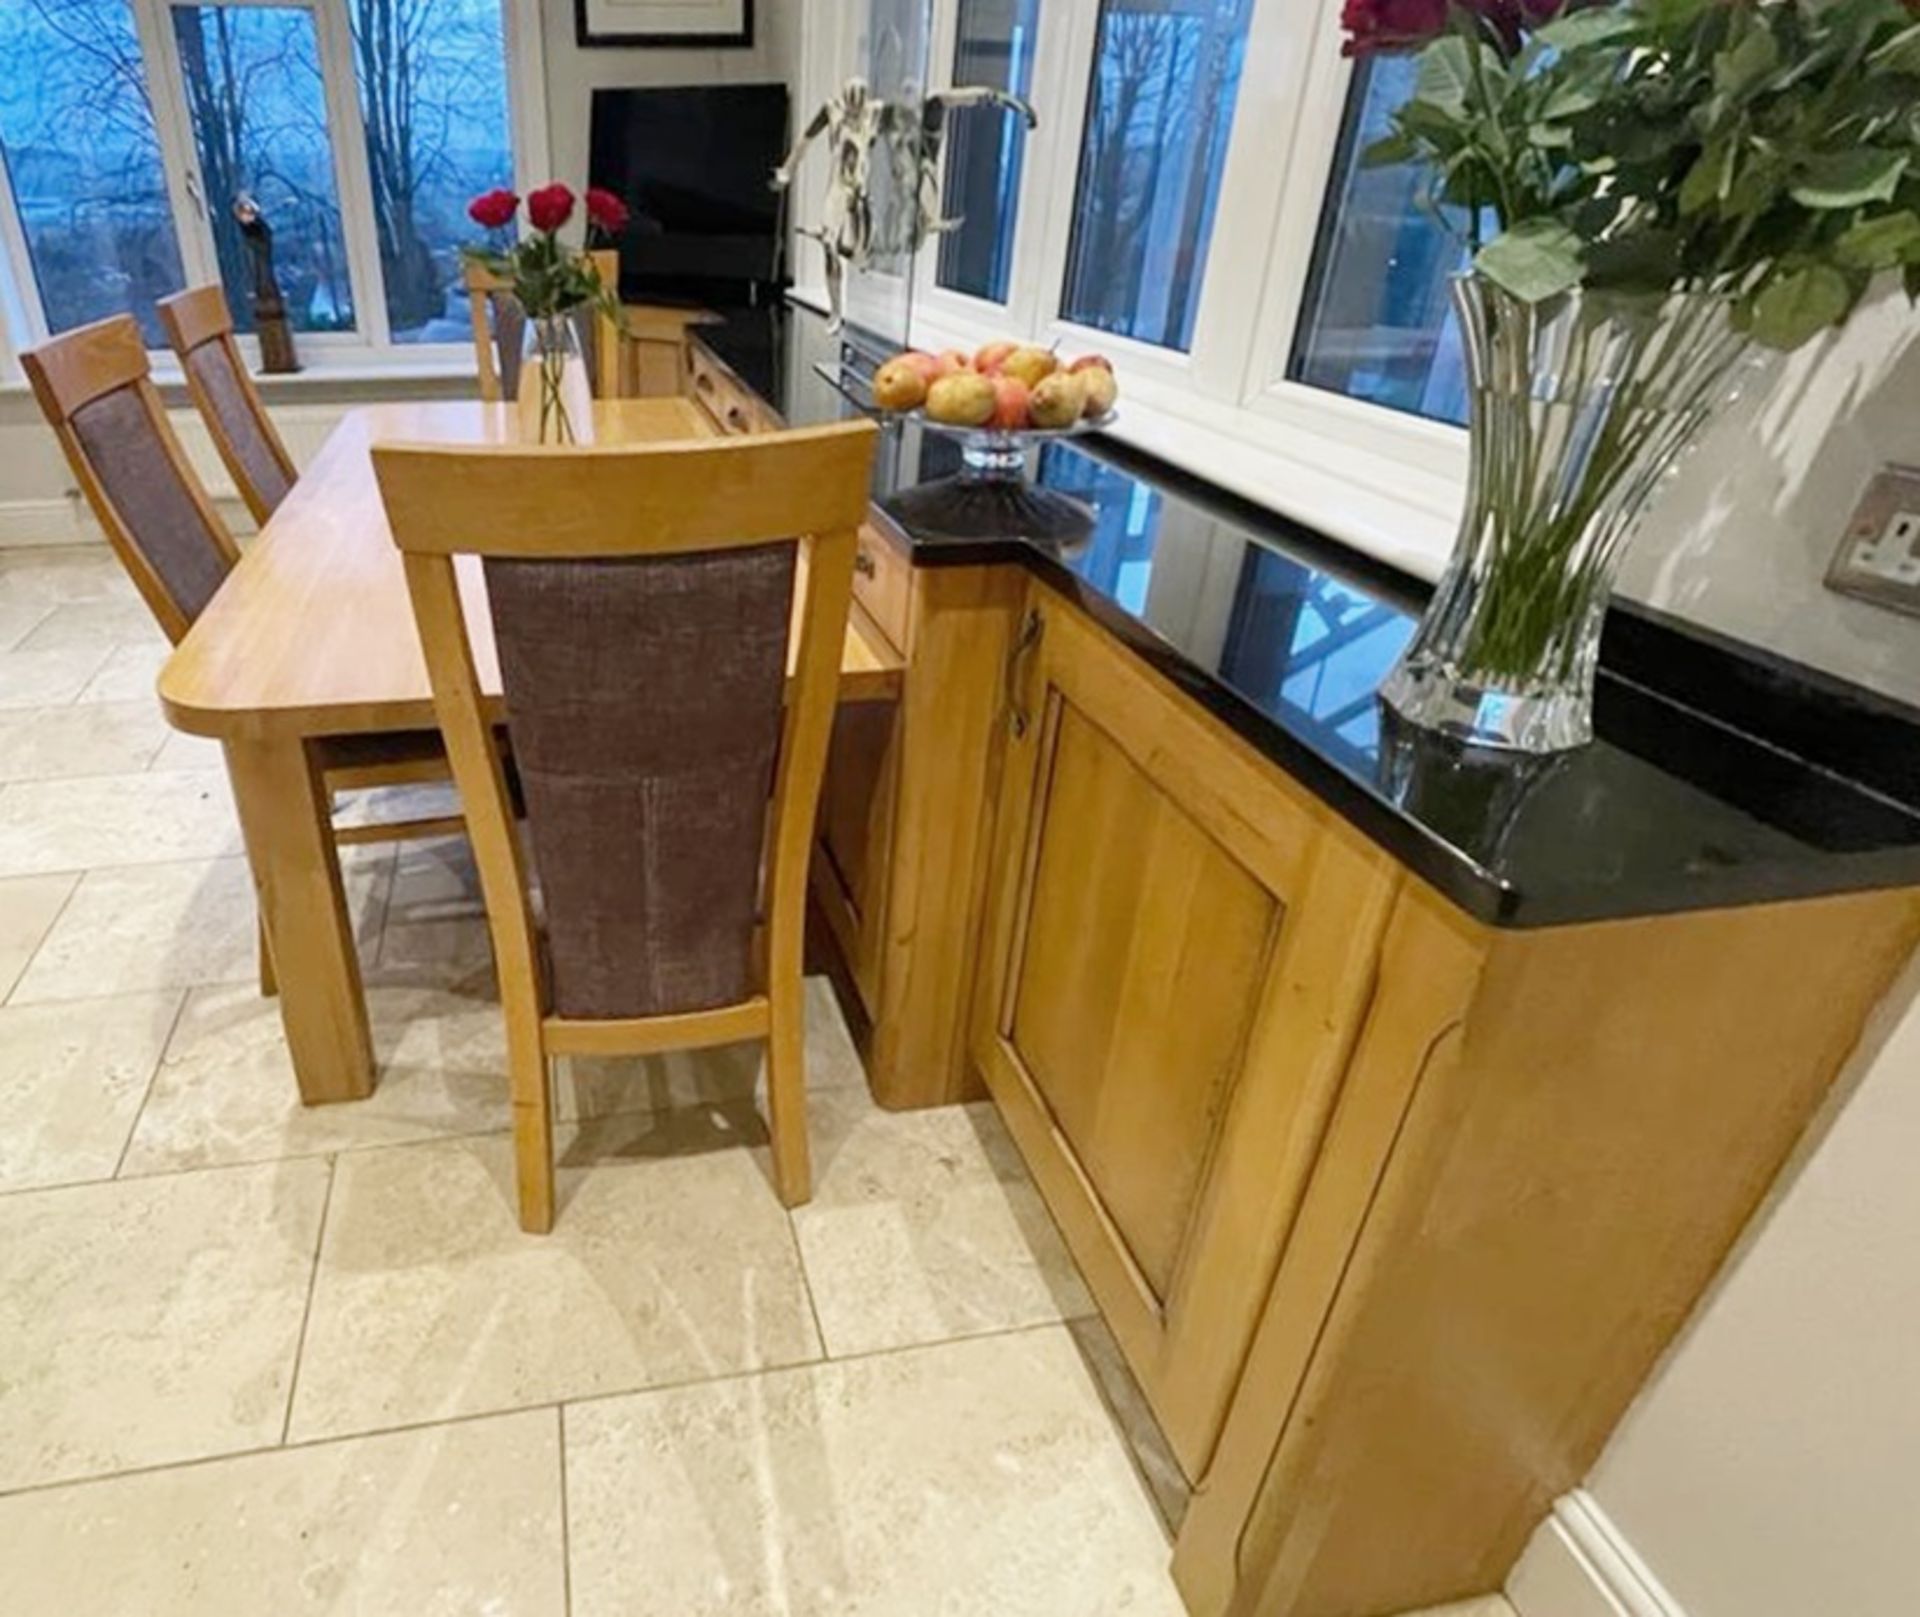 1 x Bespoke Solid Oak Kitchen With Black Granite Worktops, Island, Utility Room Units & Dining Table - Image 69 of 70